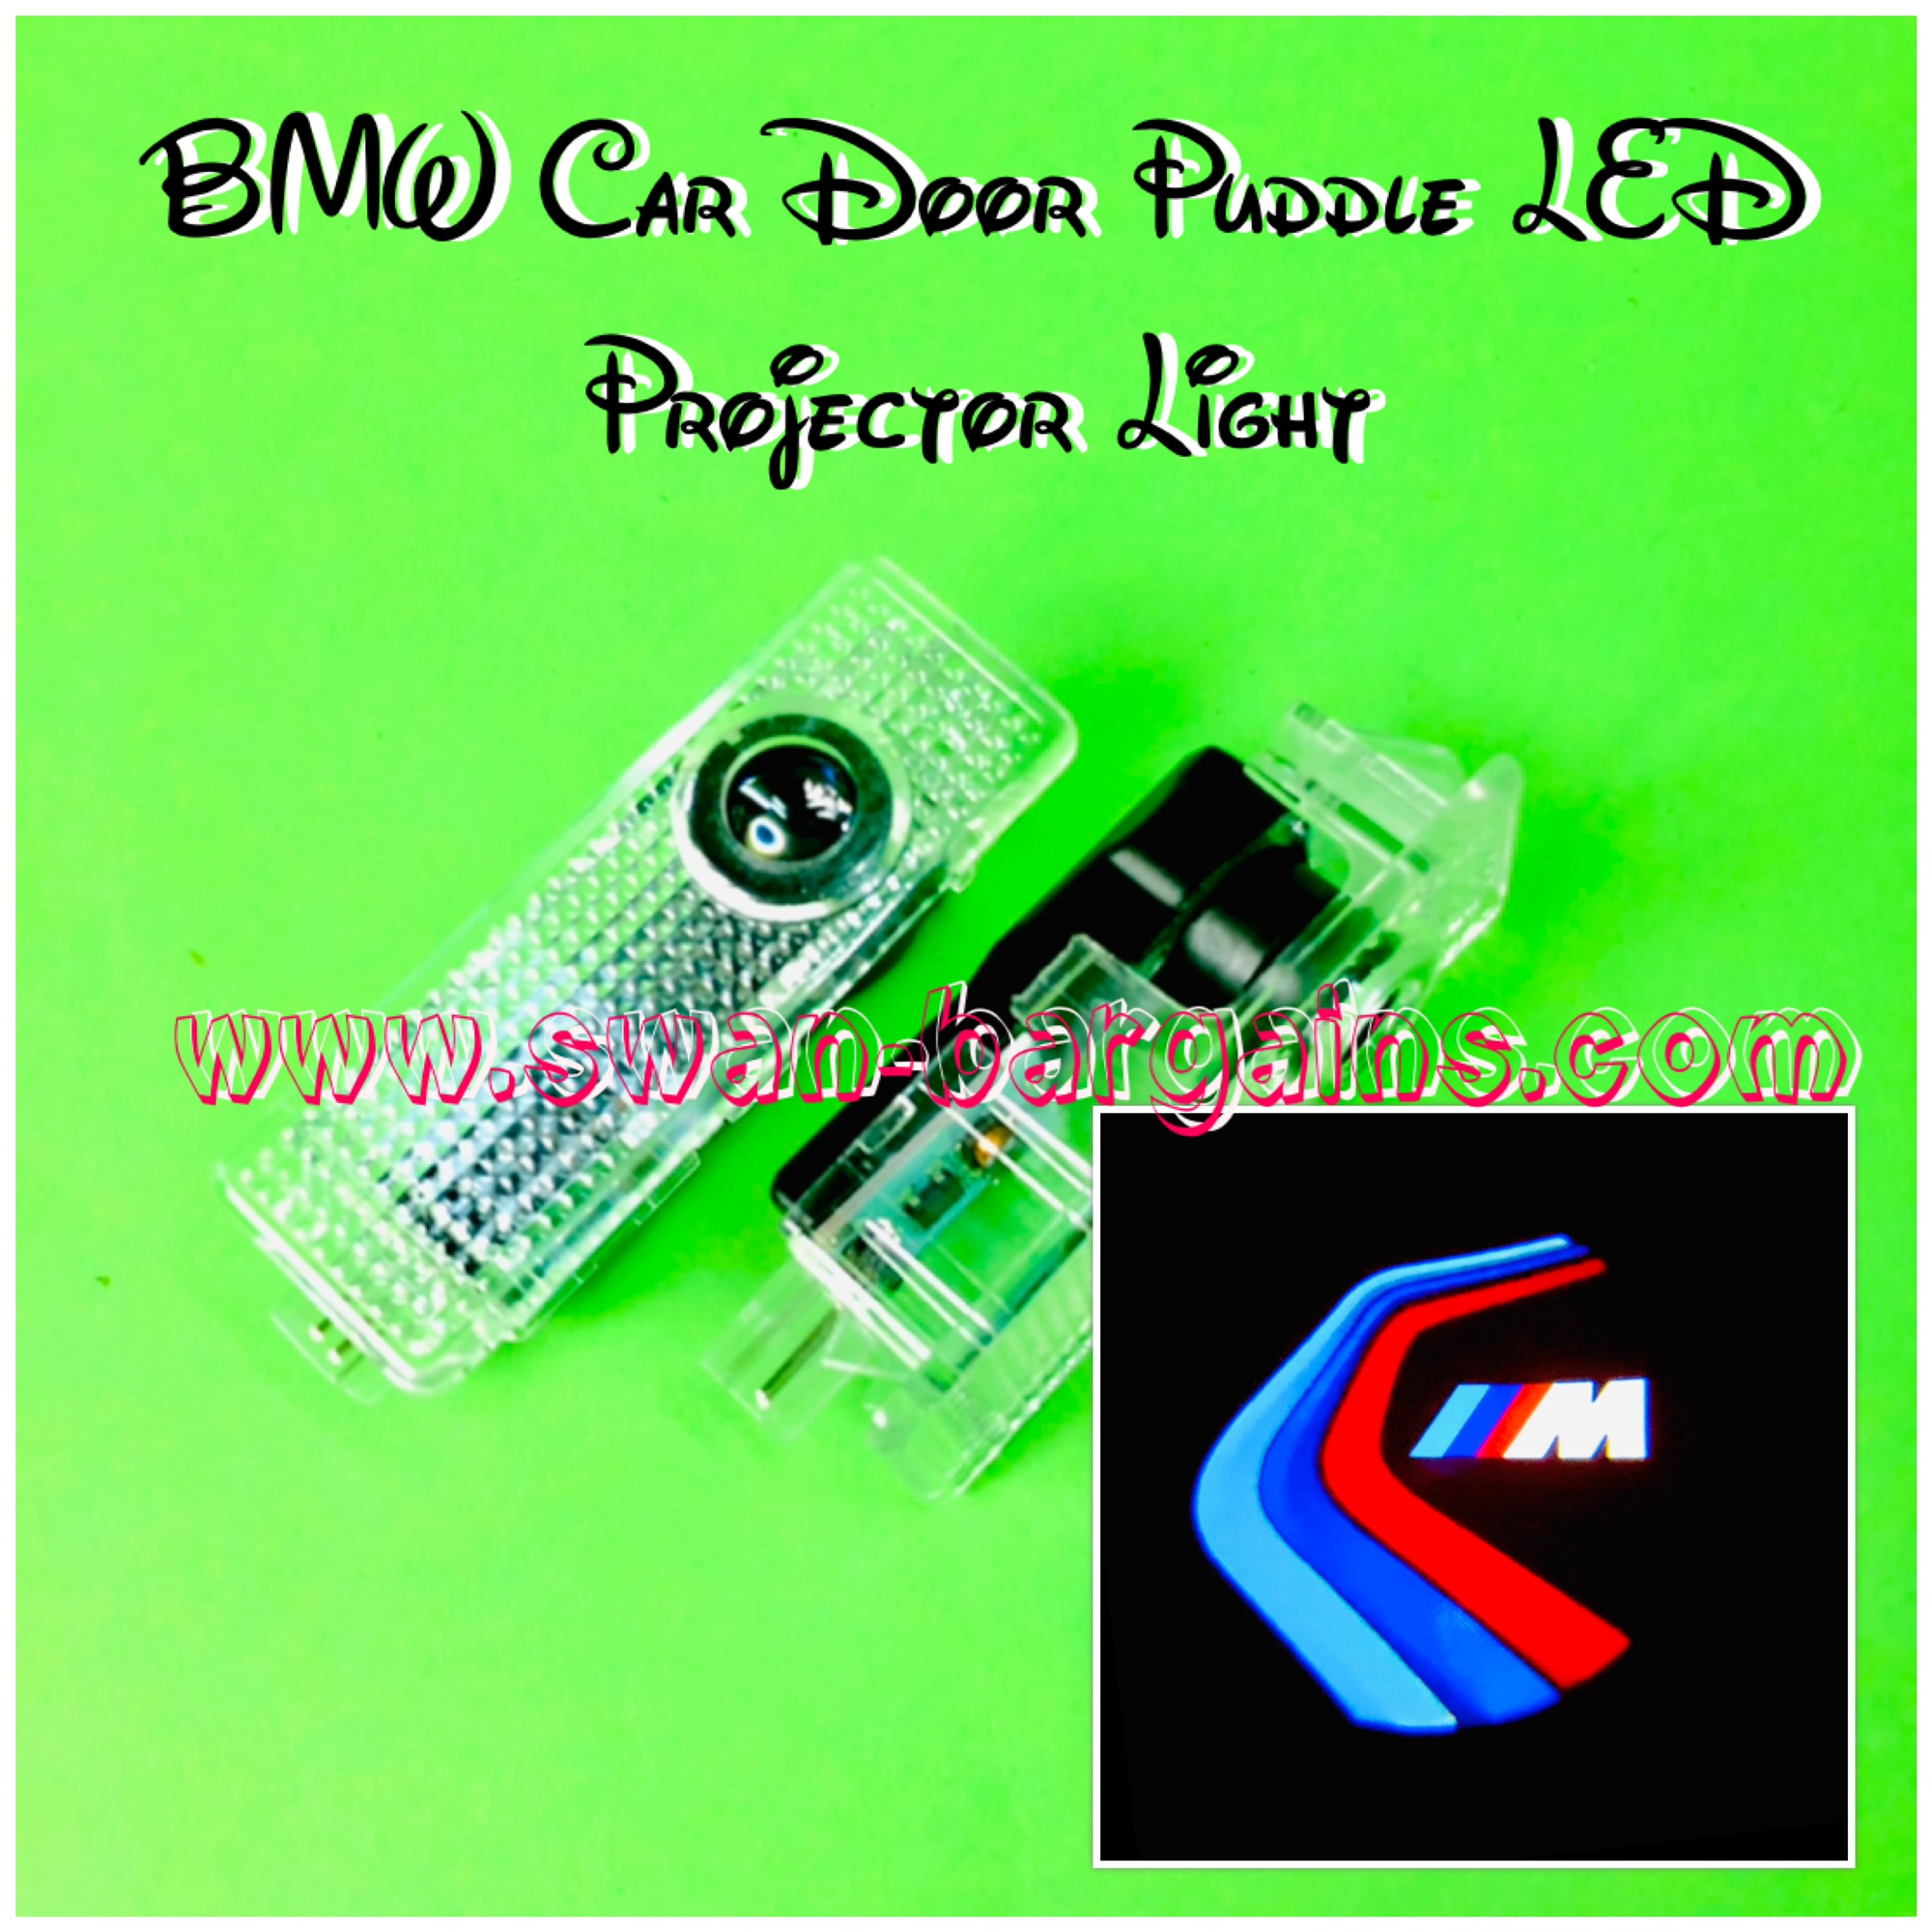 BMW Integrated Door Courtesy LED Projector Lamp Singapore - BMW M Racing Track Stripes